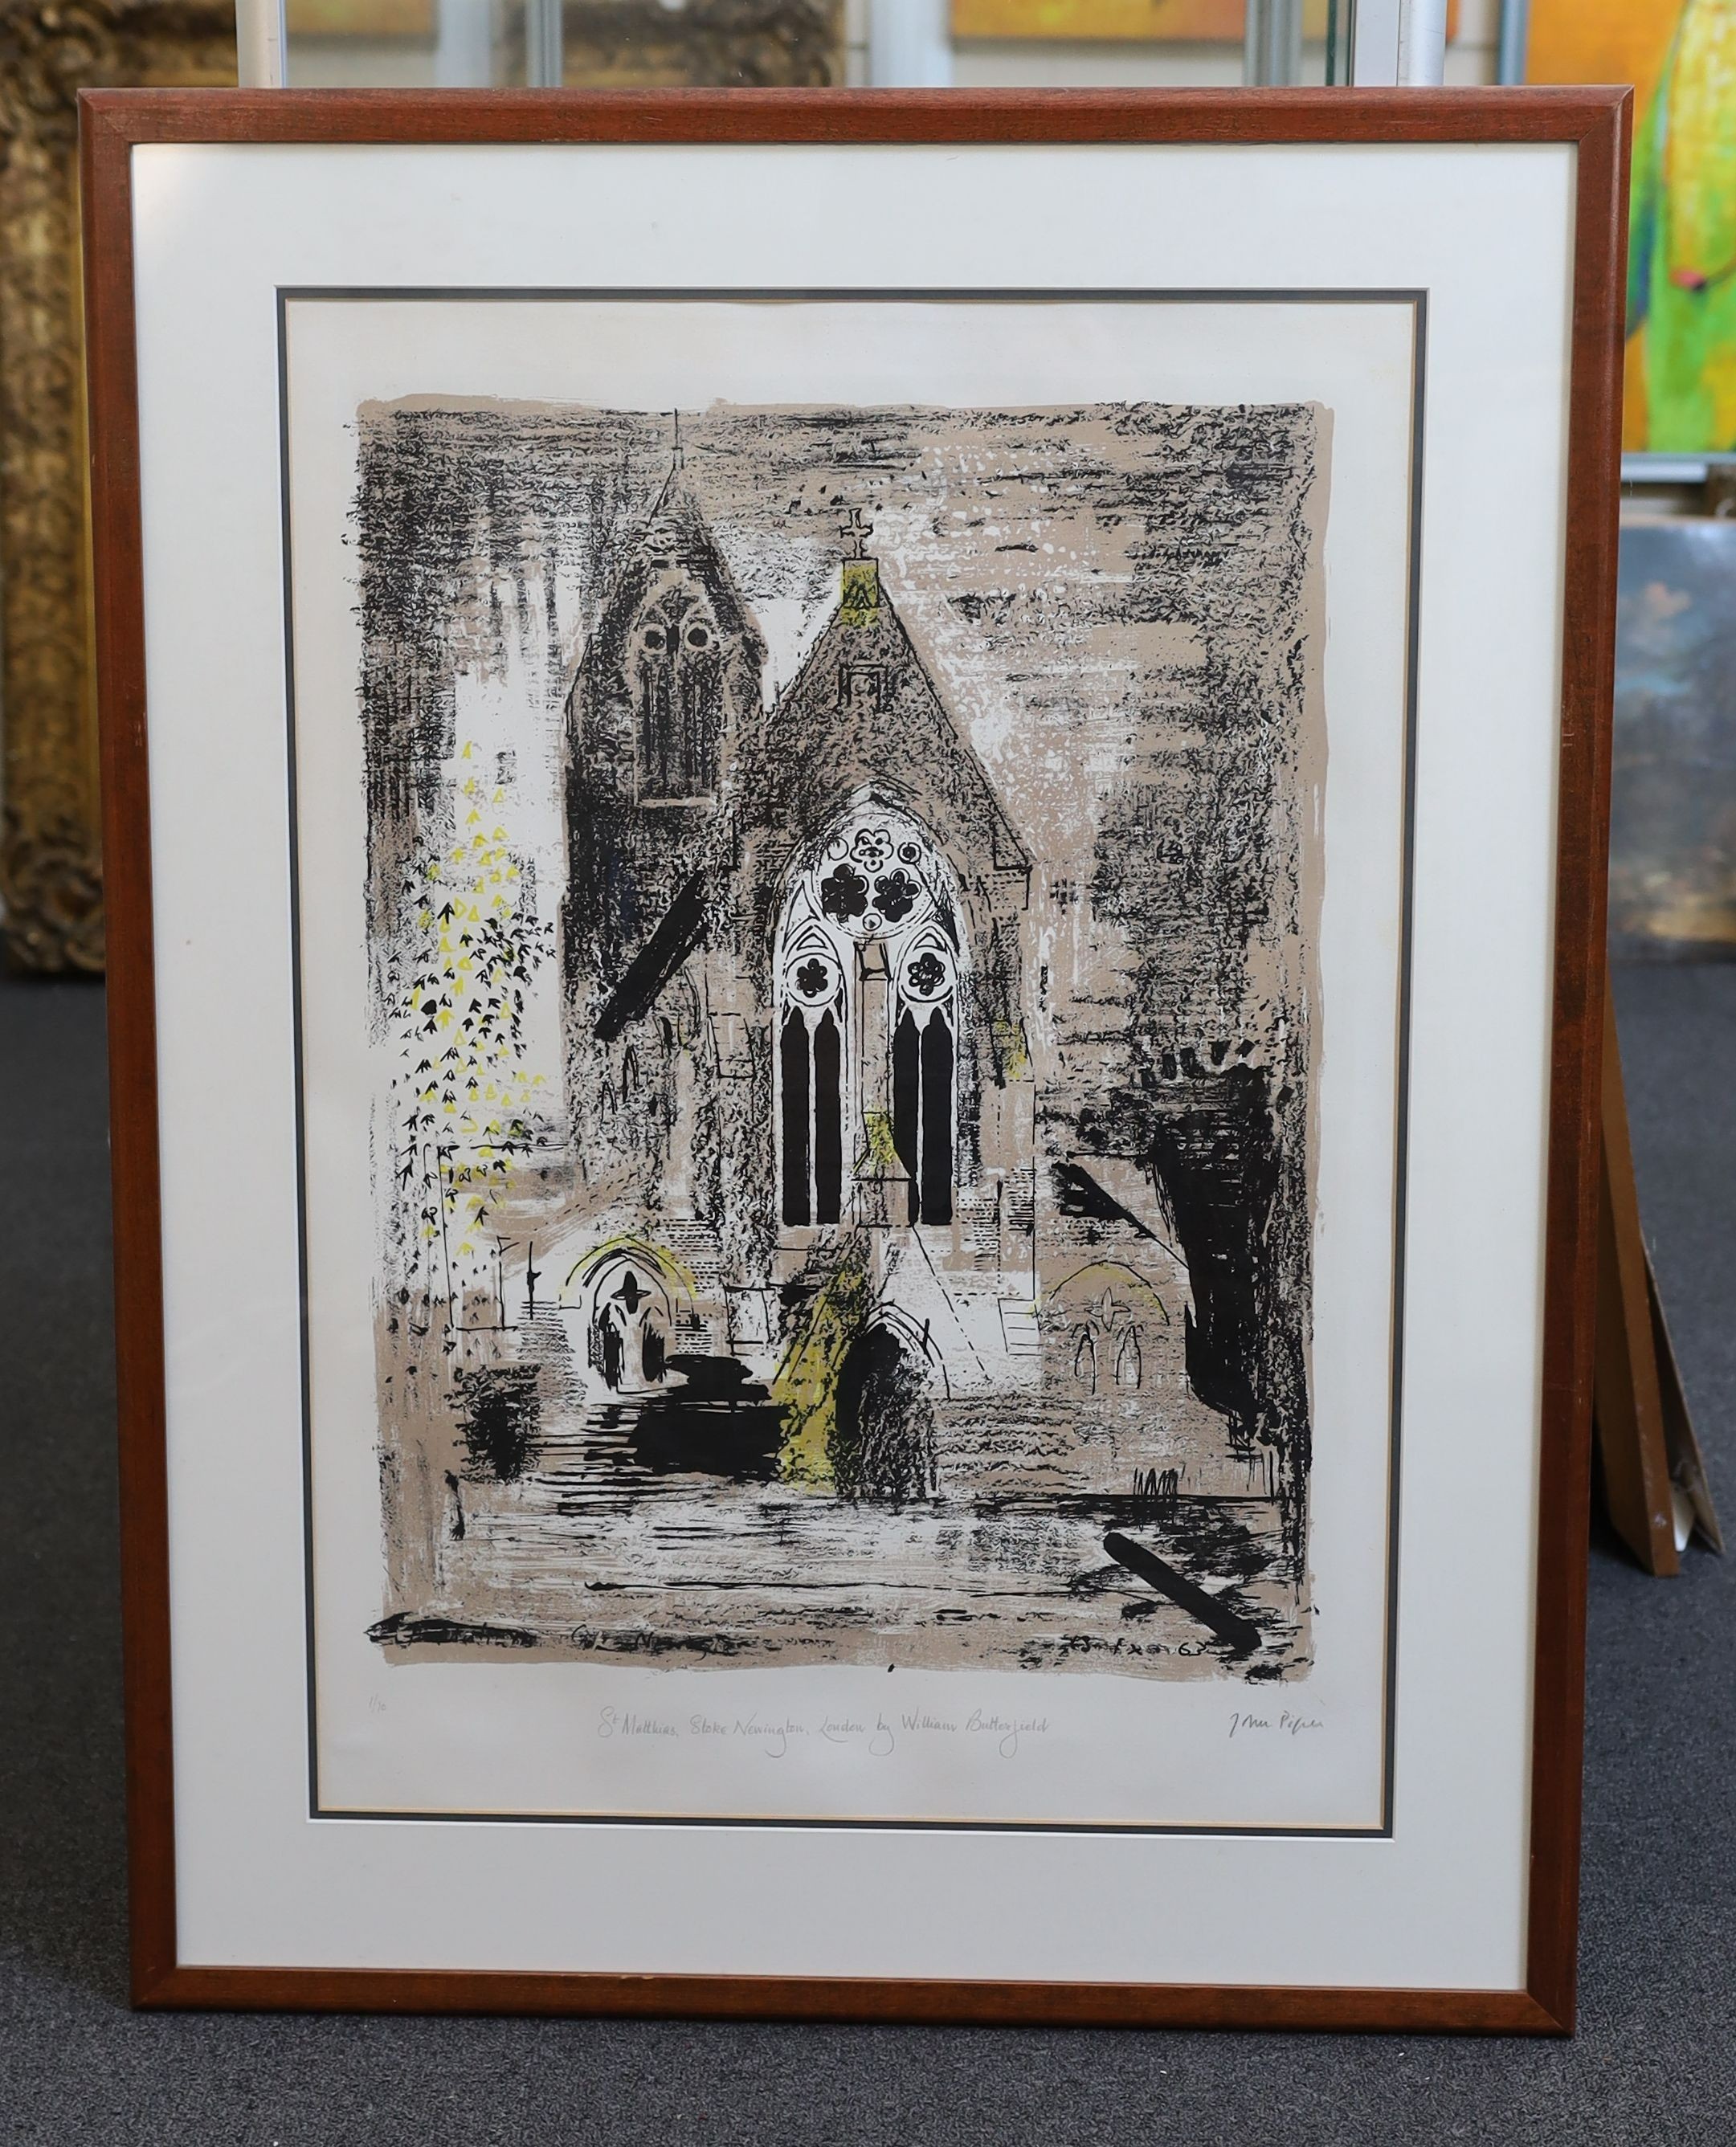 John Piper (1903-1992), St Matthias, Stoke Newington, London by William Butterfield (L 143), lithograph in colours on Barcham Green wove, 78 x 56cm